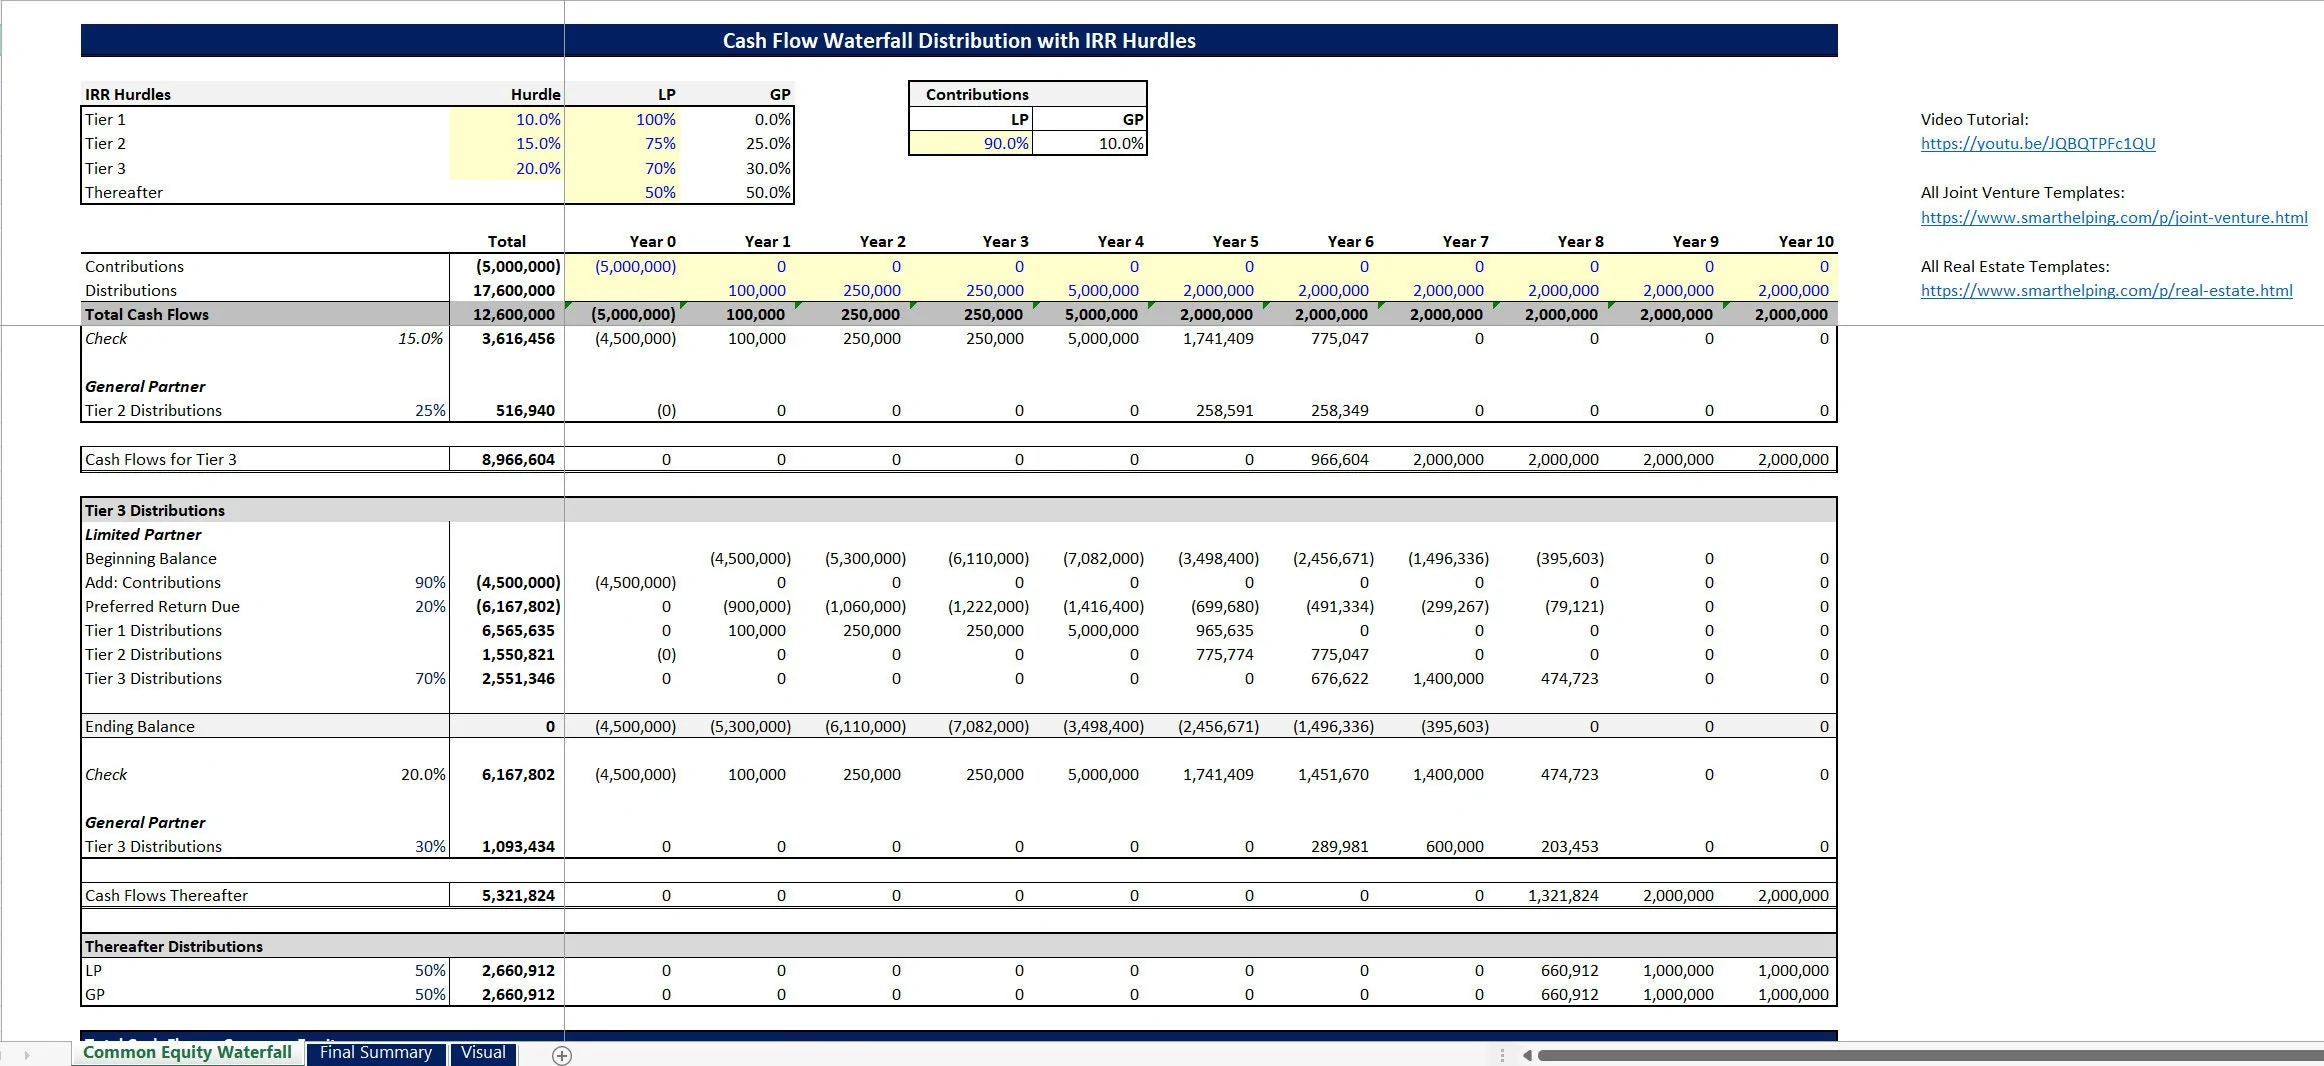 Cash Flow Waterfall with 3 IRR Hurdles (Excel workbook (XLSX)) Preview Image